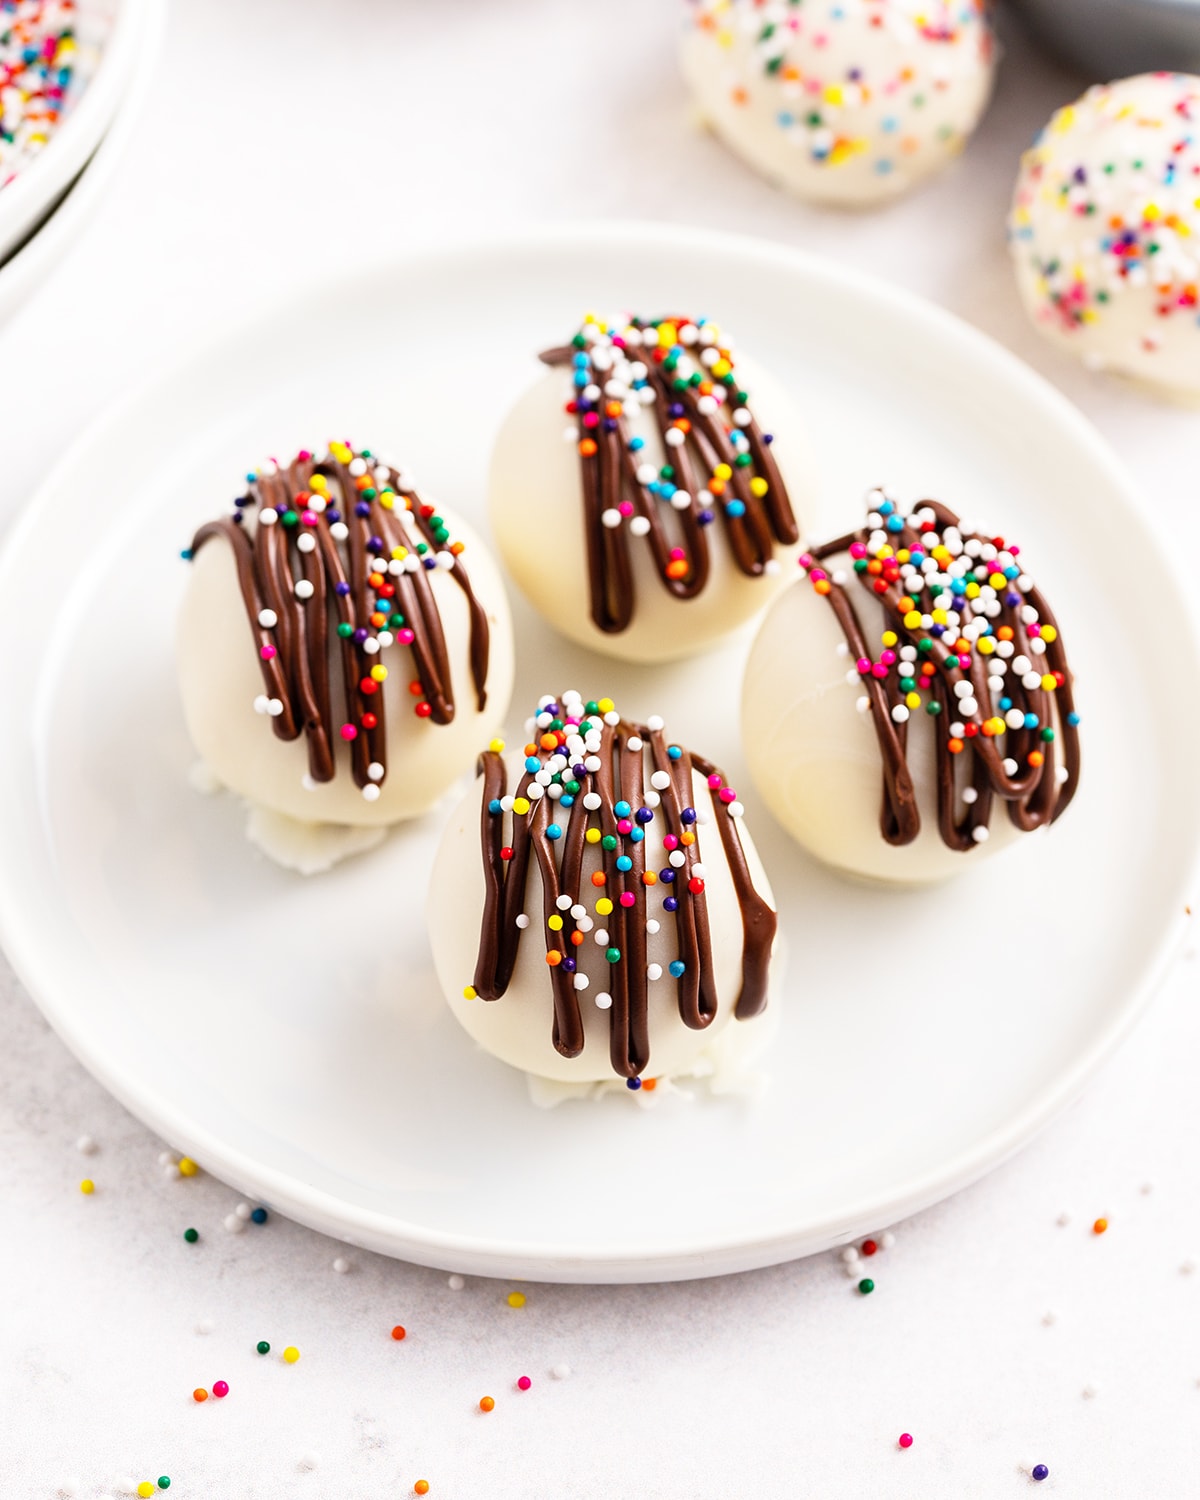 Four cake balls on a plate topped with a drizzle of melted chocolate and sprinkles.